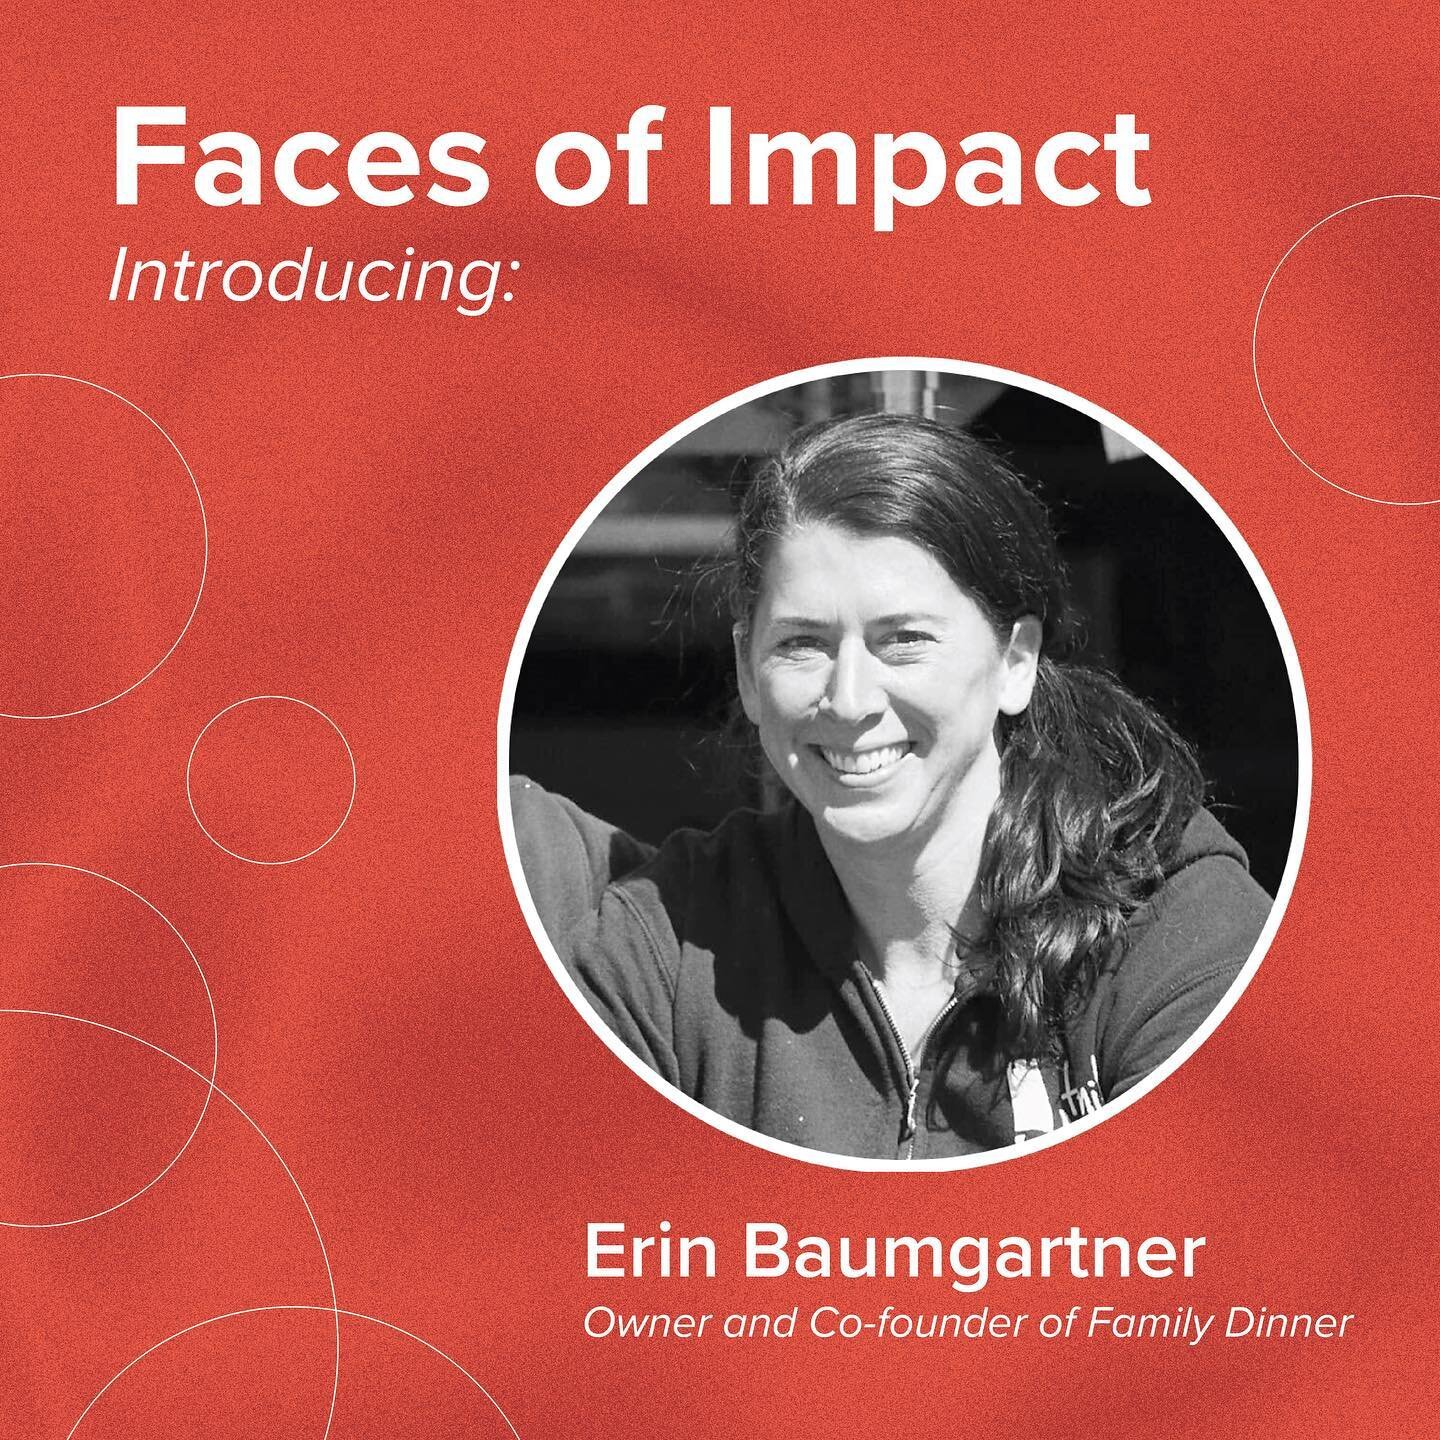 To kick off our faces of impact series, we have Co-founder and owner of Family Dinner, Erin Baumgartner!🤩 be sure to check out our story for highlights from her Q&amp;A session!

Family Dinner is a Community Supported Agriculture (CSA) organization 